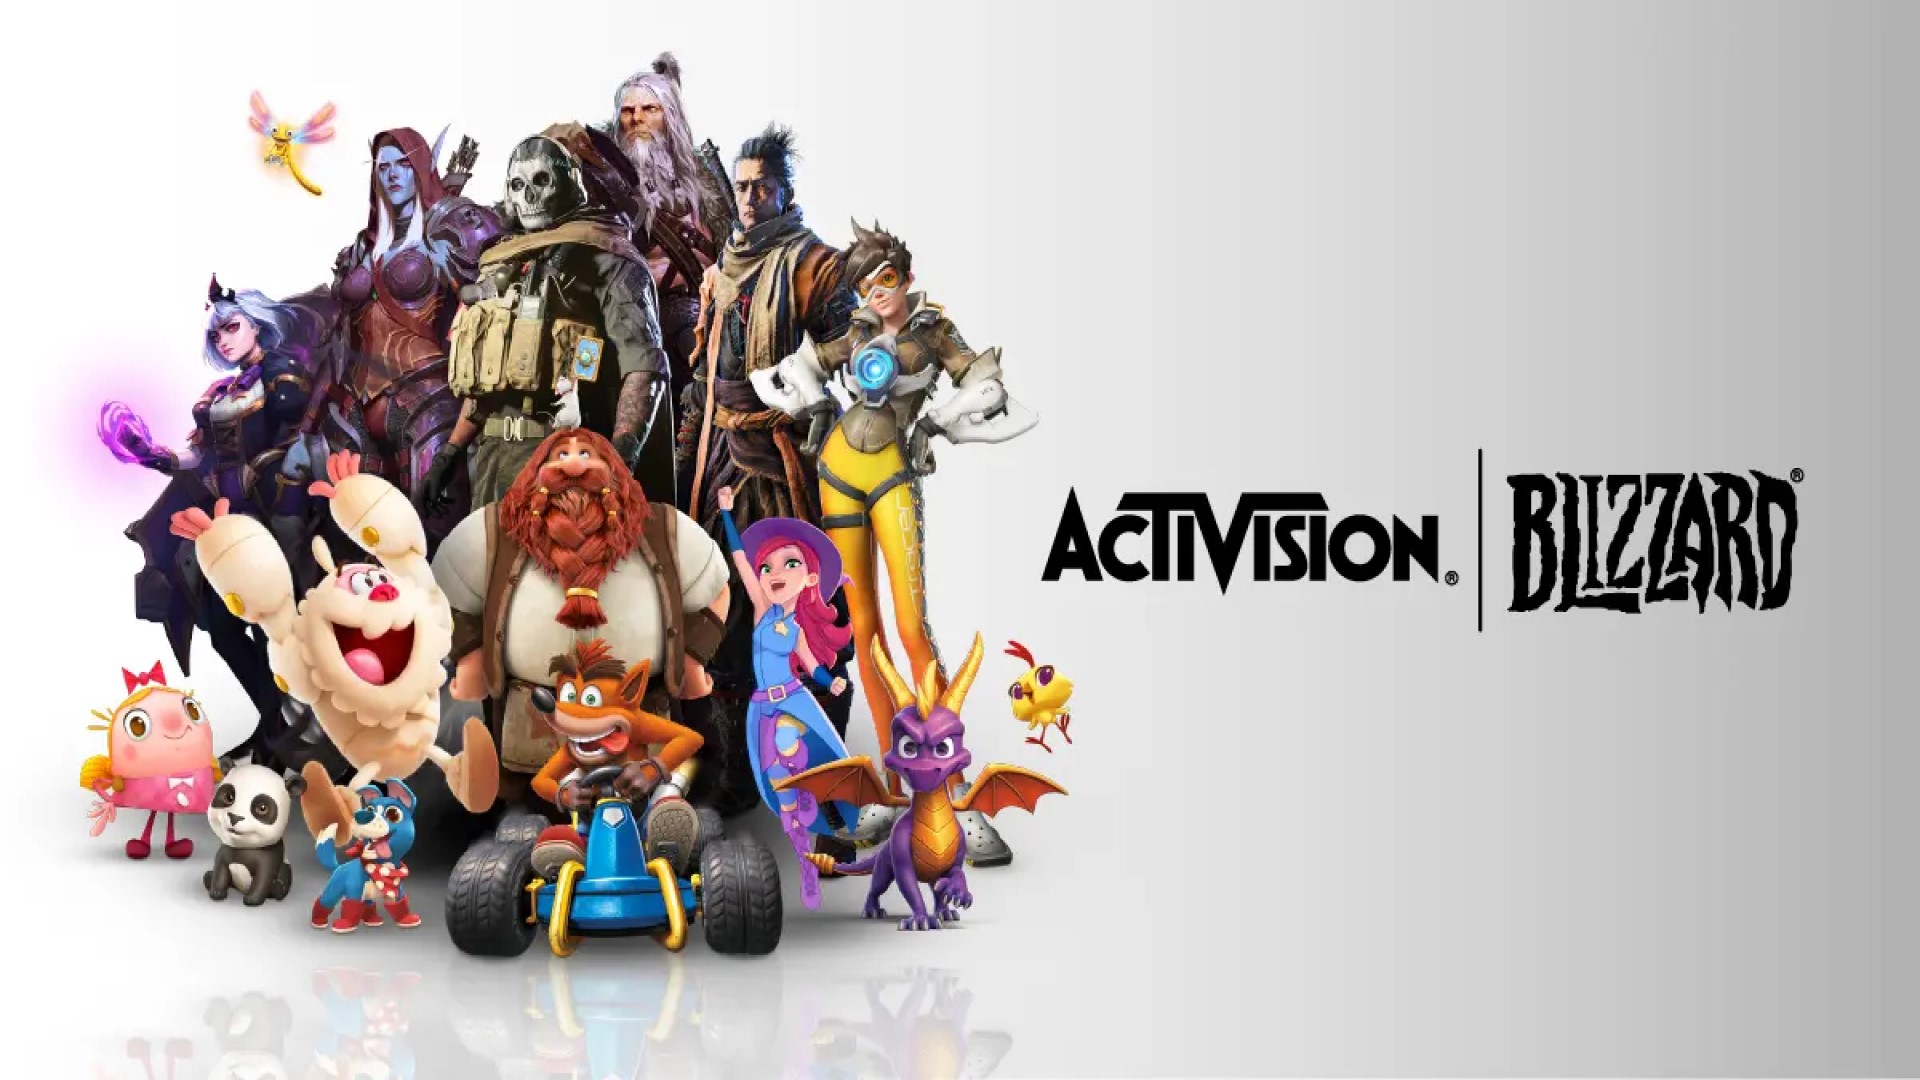 Activision Blizzard Mascot Characters